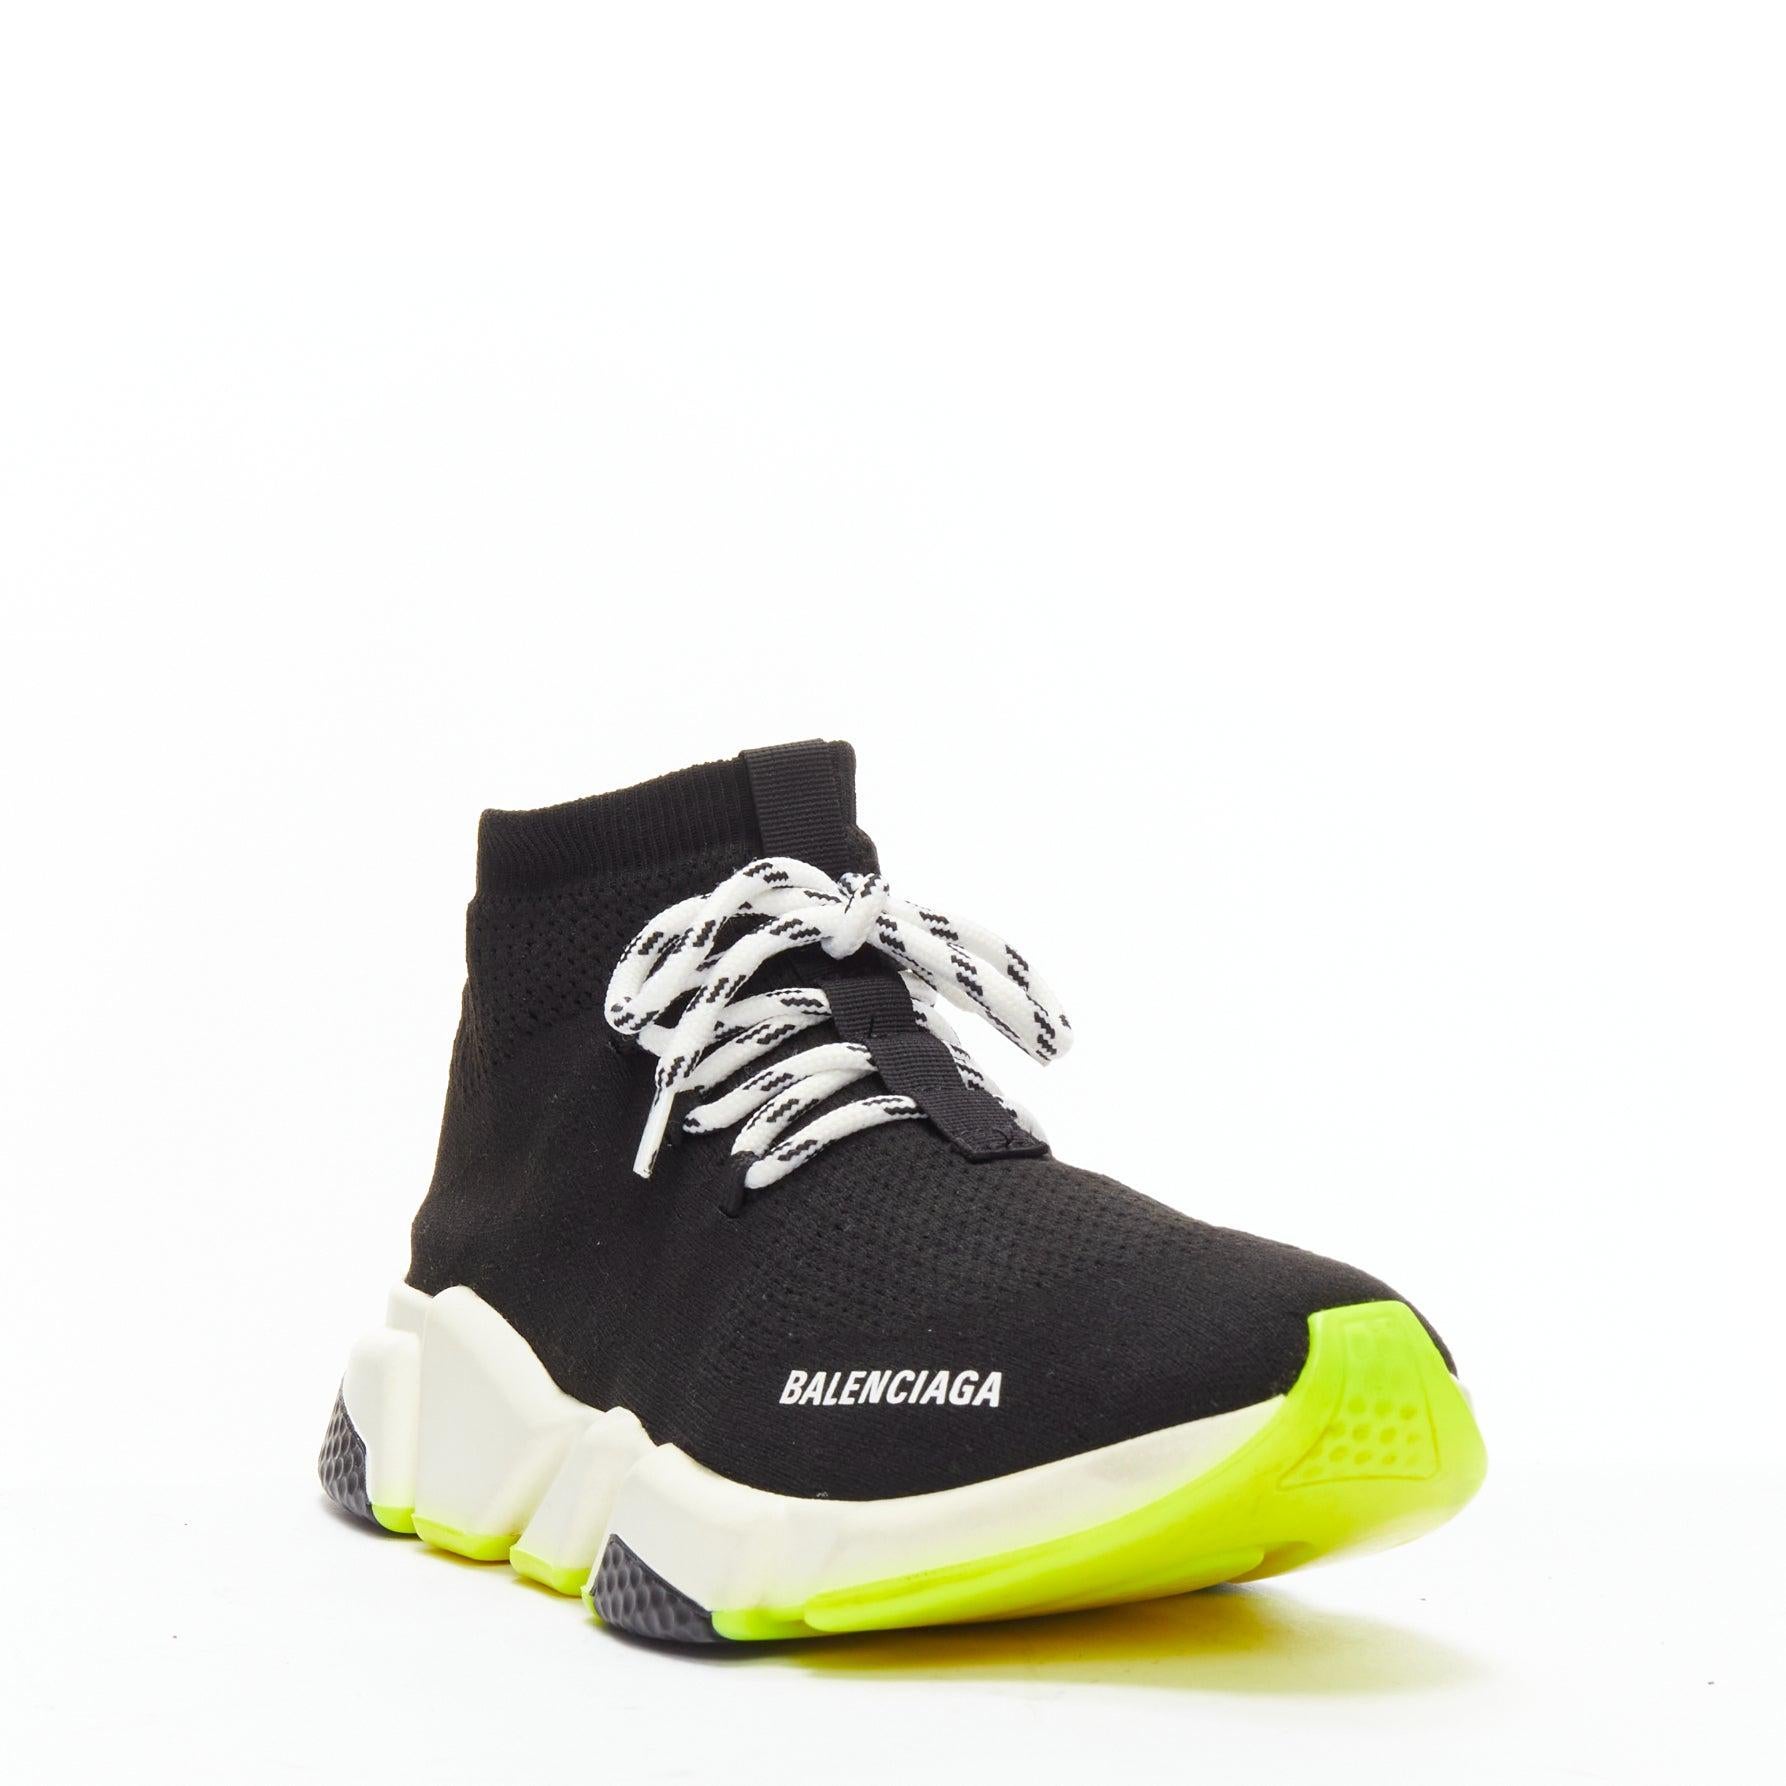 BALENCIAGA Speed neon yellow black logo sock sneakers EU40
Reference: CELE/A00010
Brand: Balenciaga
Model: Speed
Material: Fabric
Color: Black, Neon Yellow
Pattern: Solid
Closure: Lace Up
Lining: Black Fabric
Extra Details: Logo also at